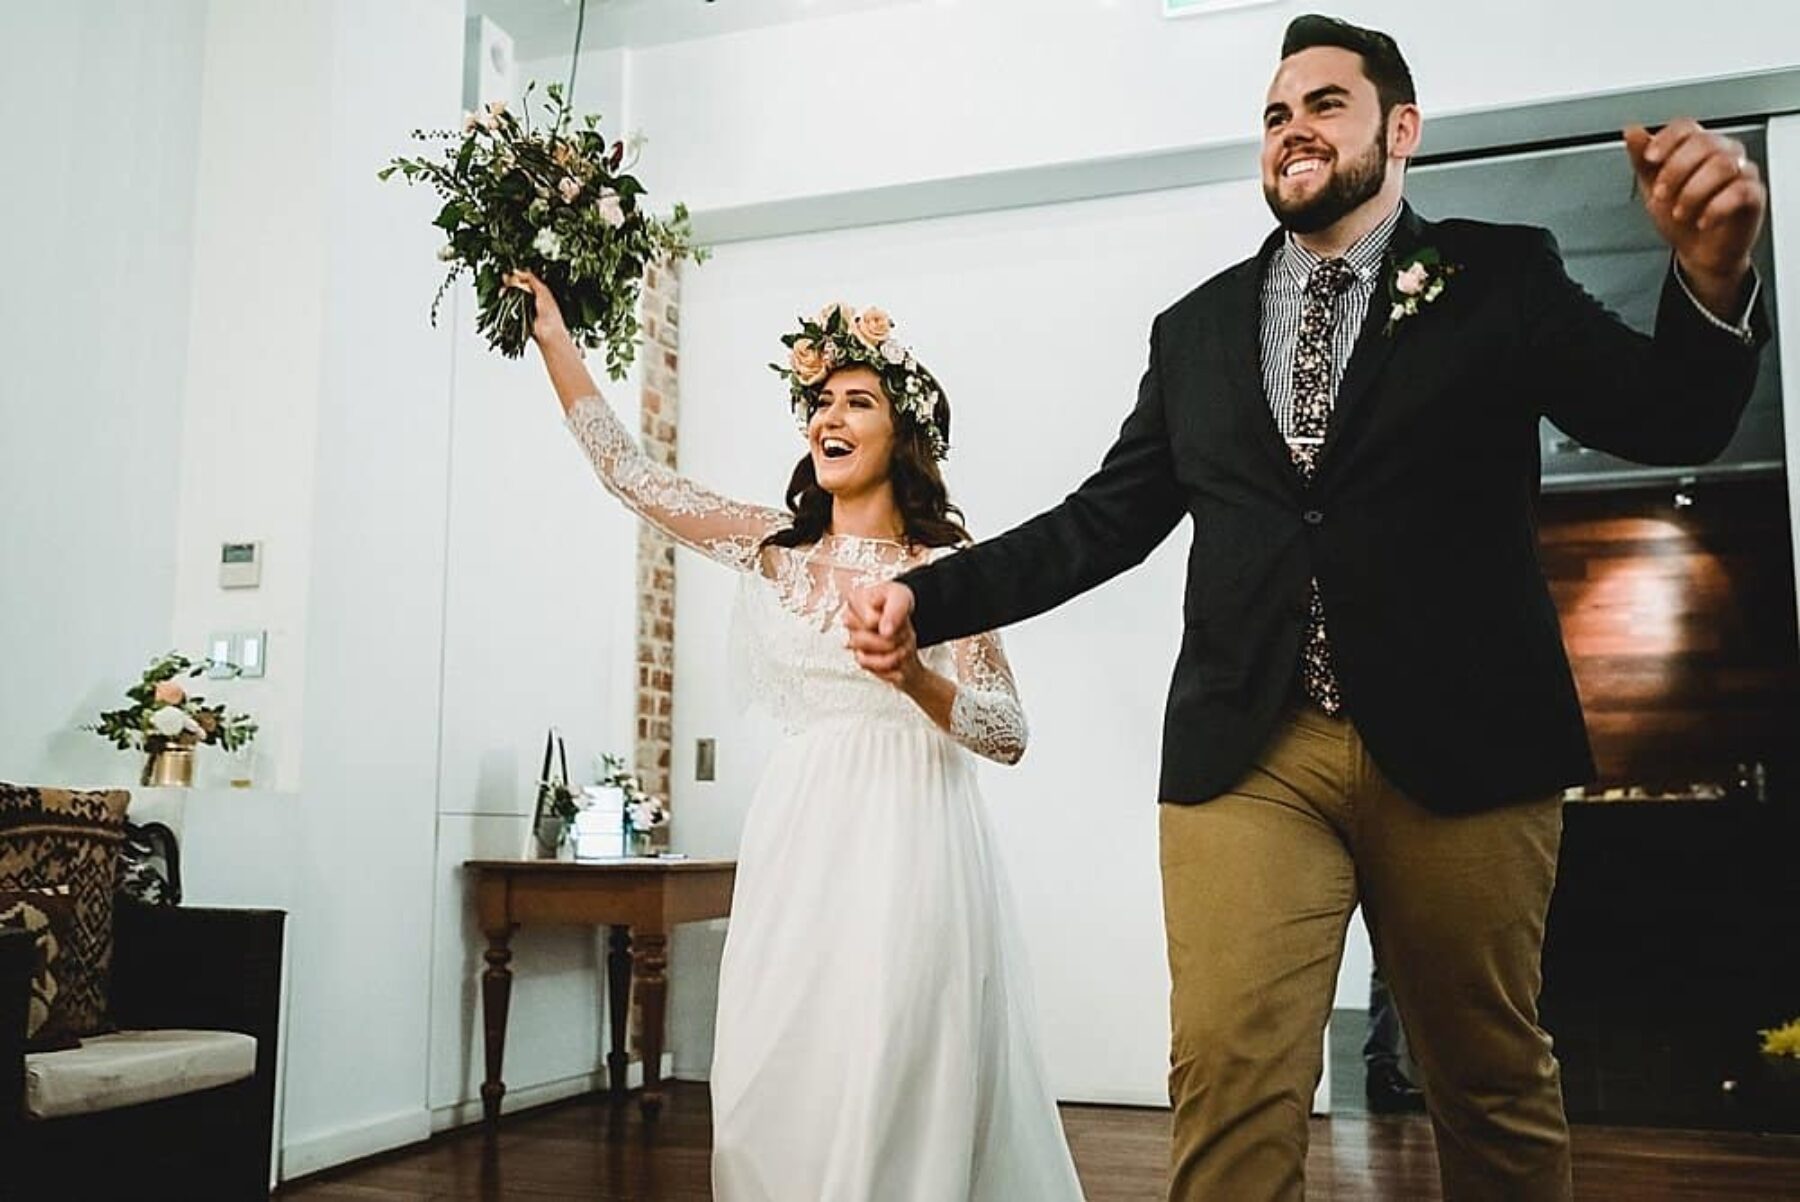 vintage-inspired wedding at The Flour Factory Perth - CJ Williams photography